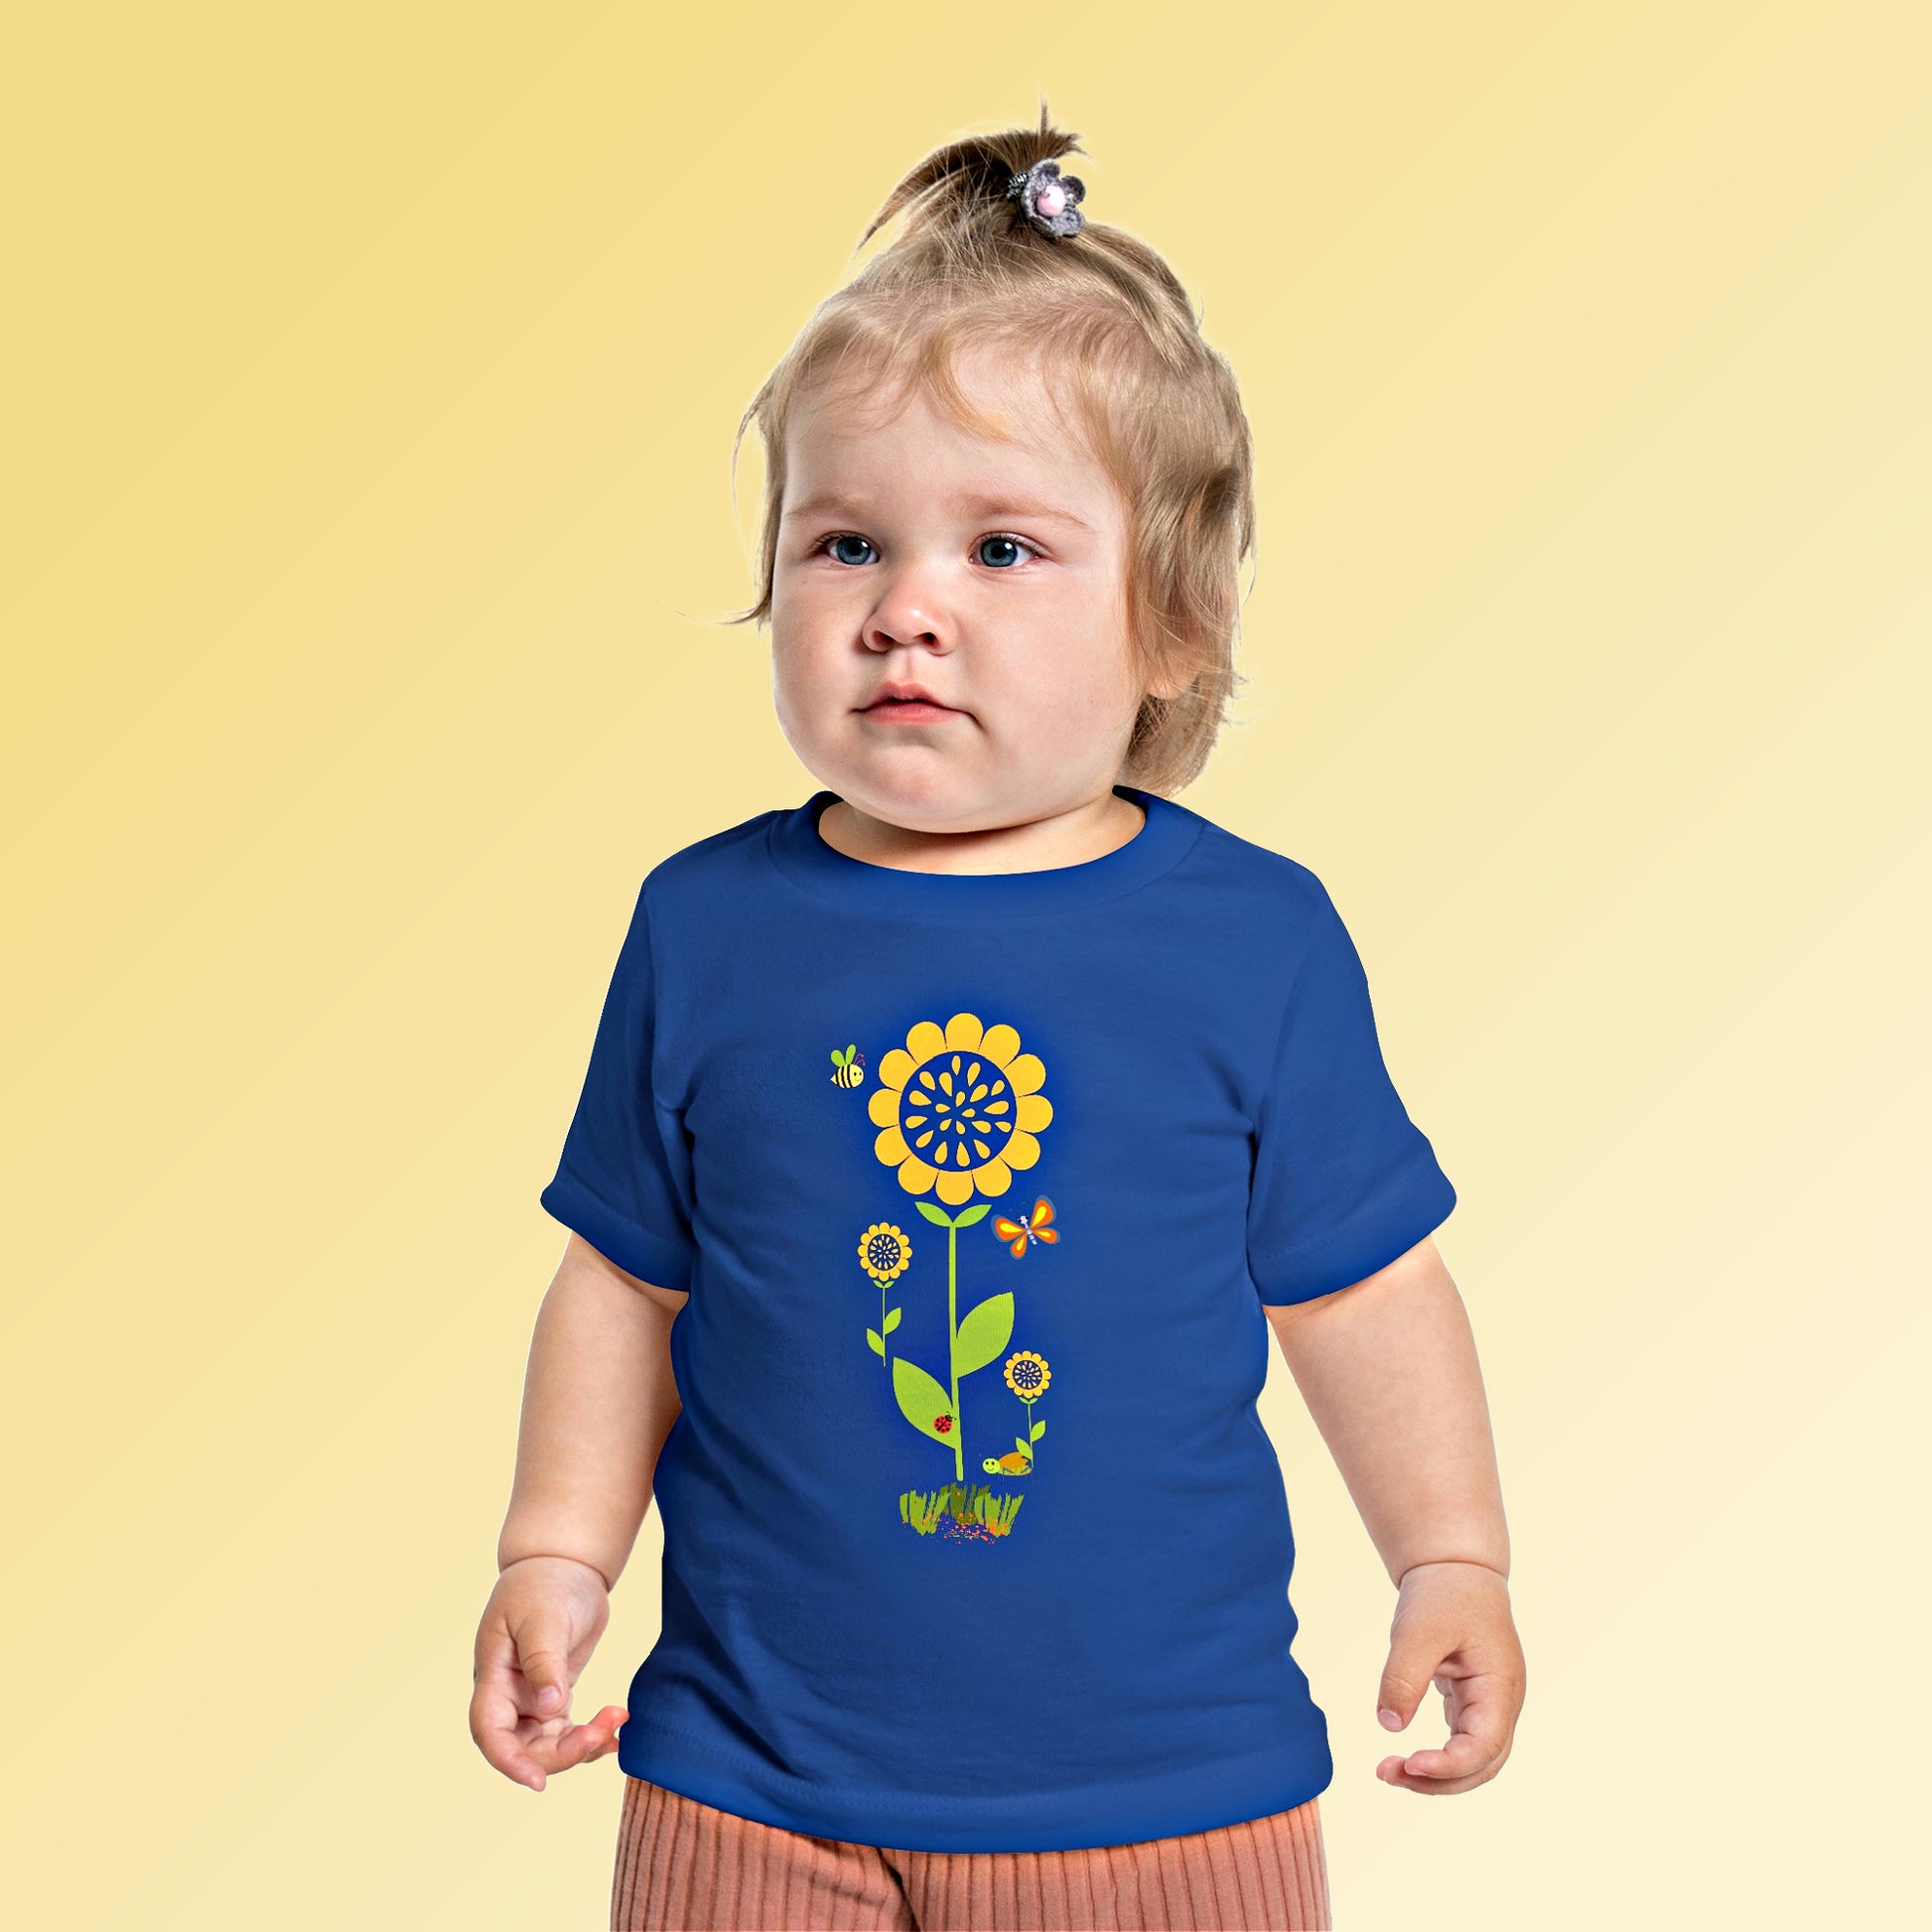 Mock up of a toddler wearing our Royal t-shirt